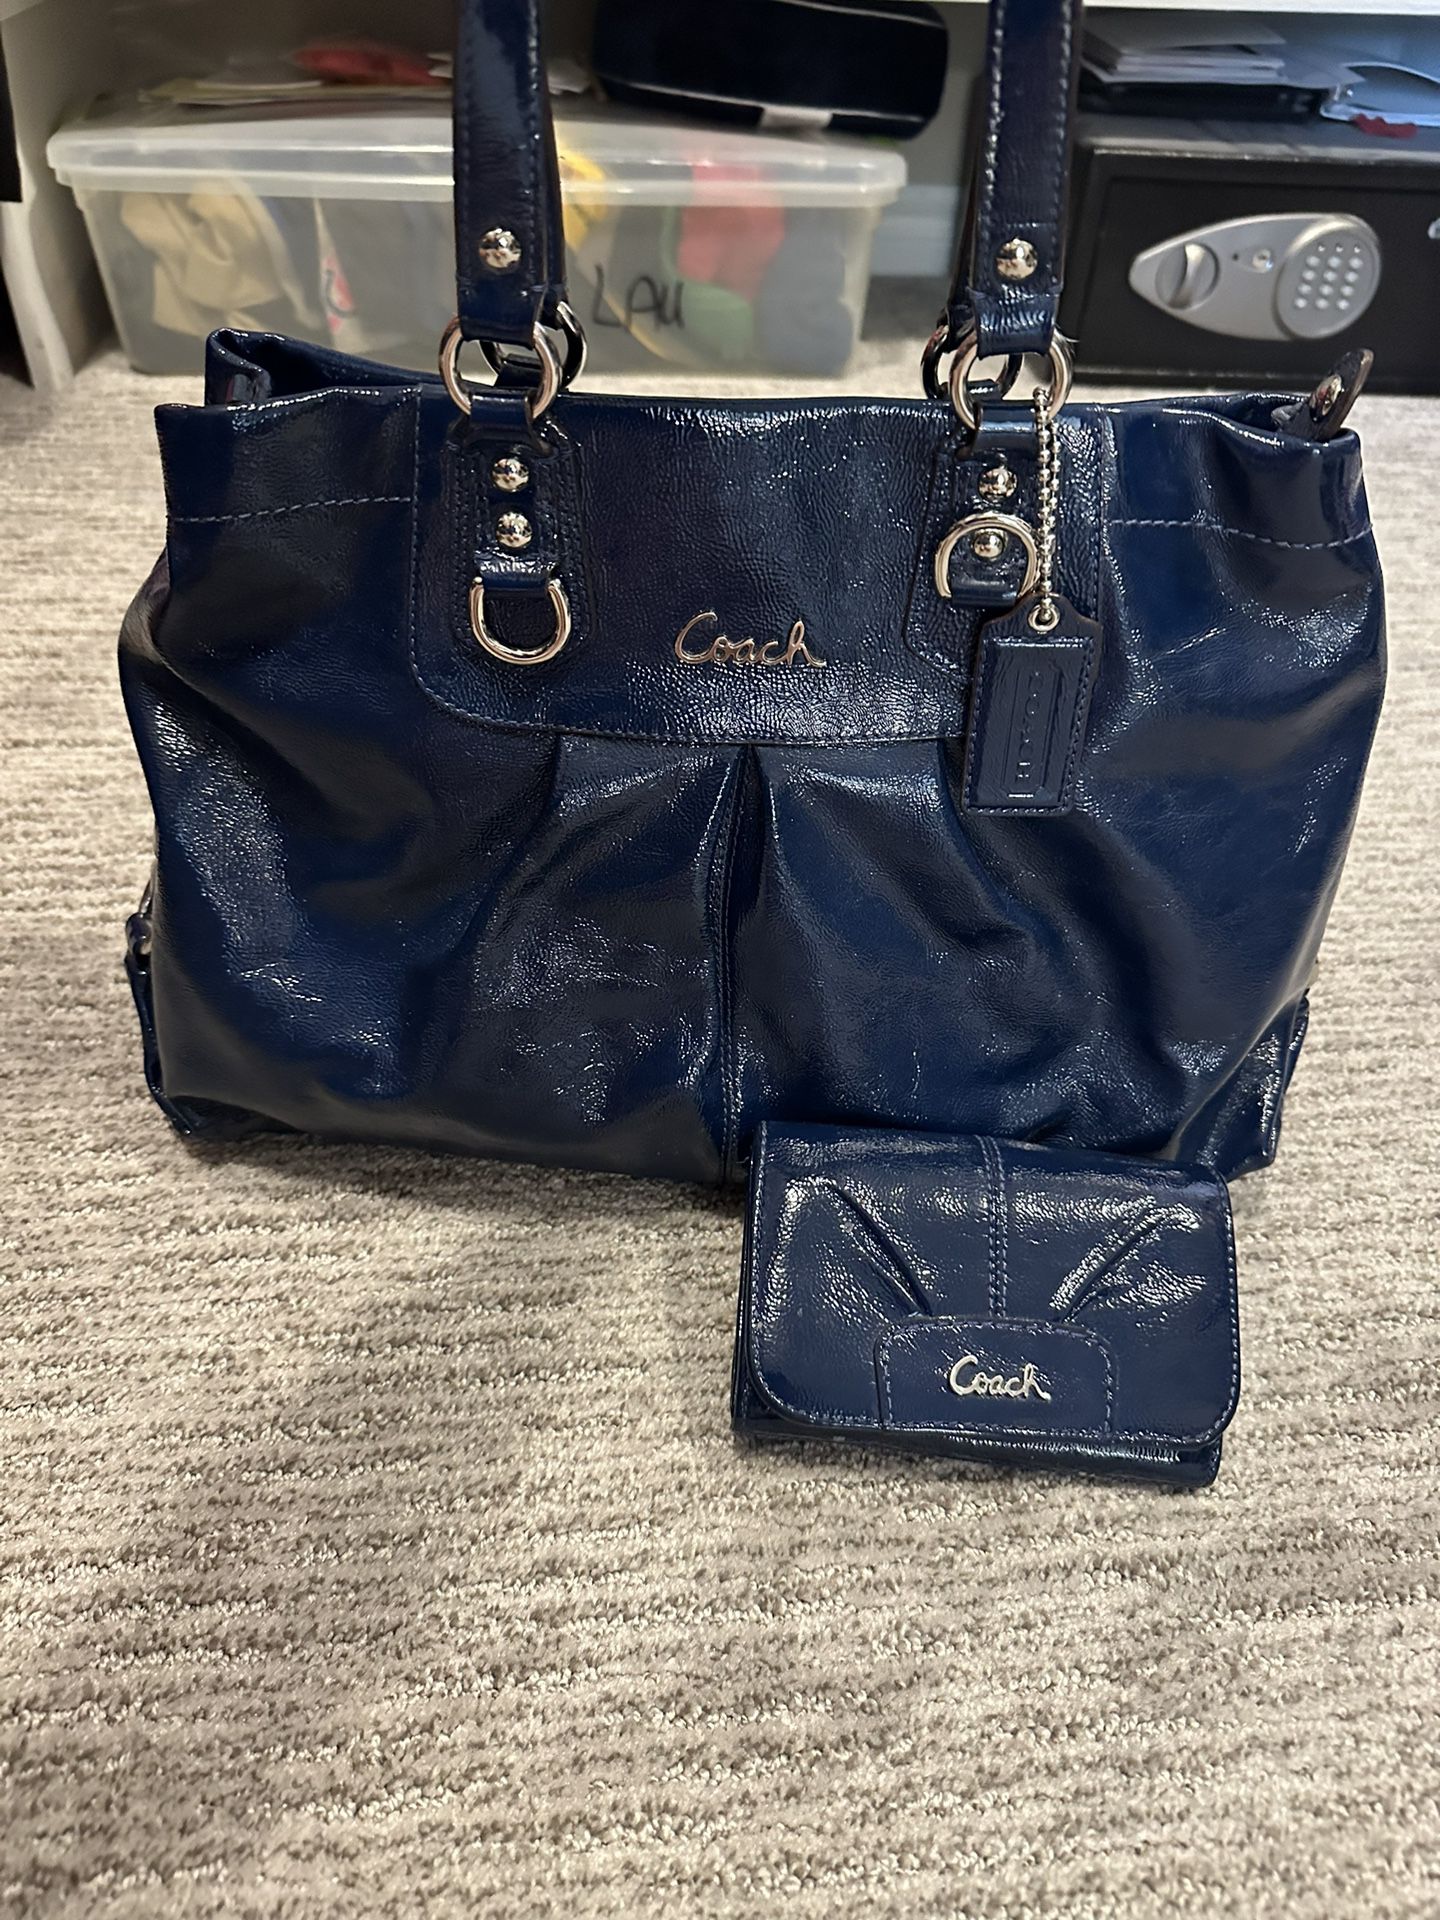 Coach Patent Leather Purse and Wallet (Blue)